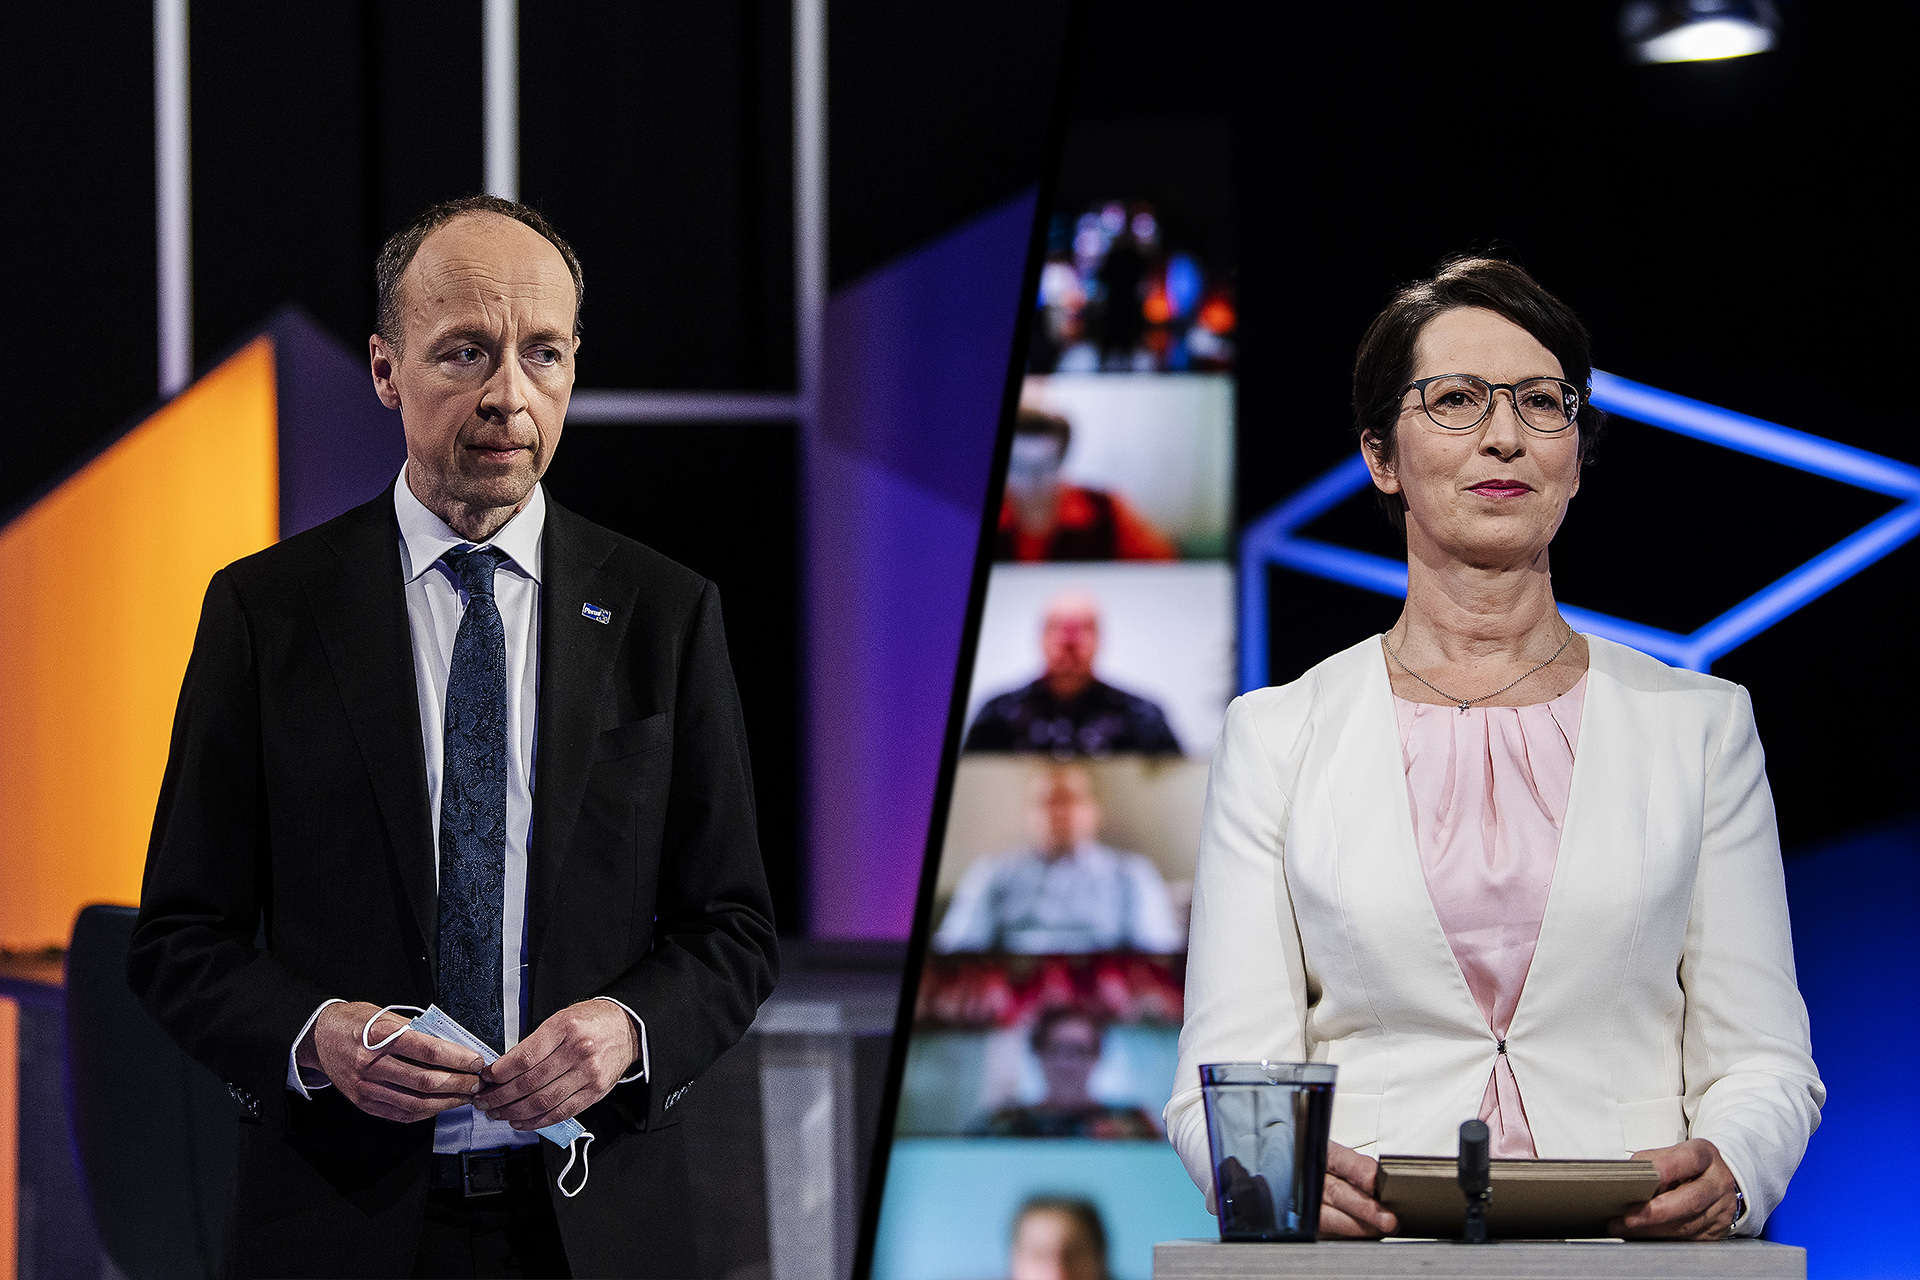 Yle's fact check: How true are the party leader's statements about immigration, employment?